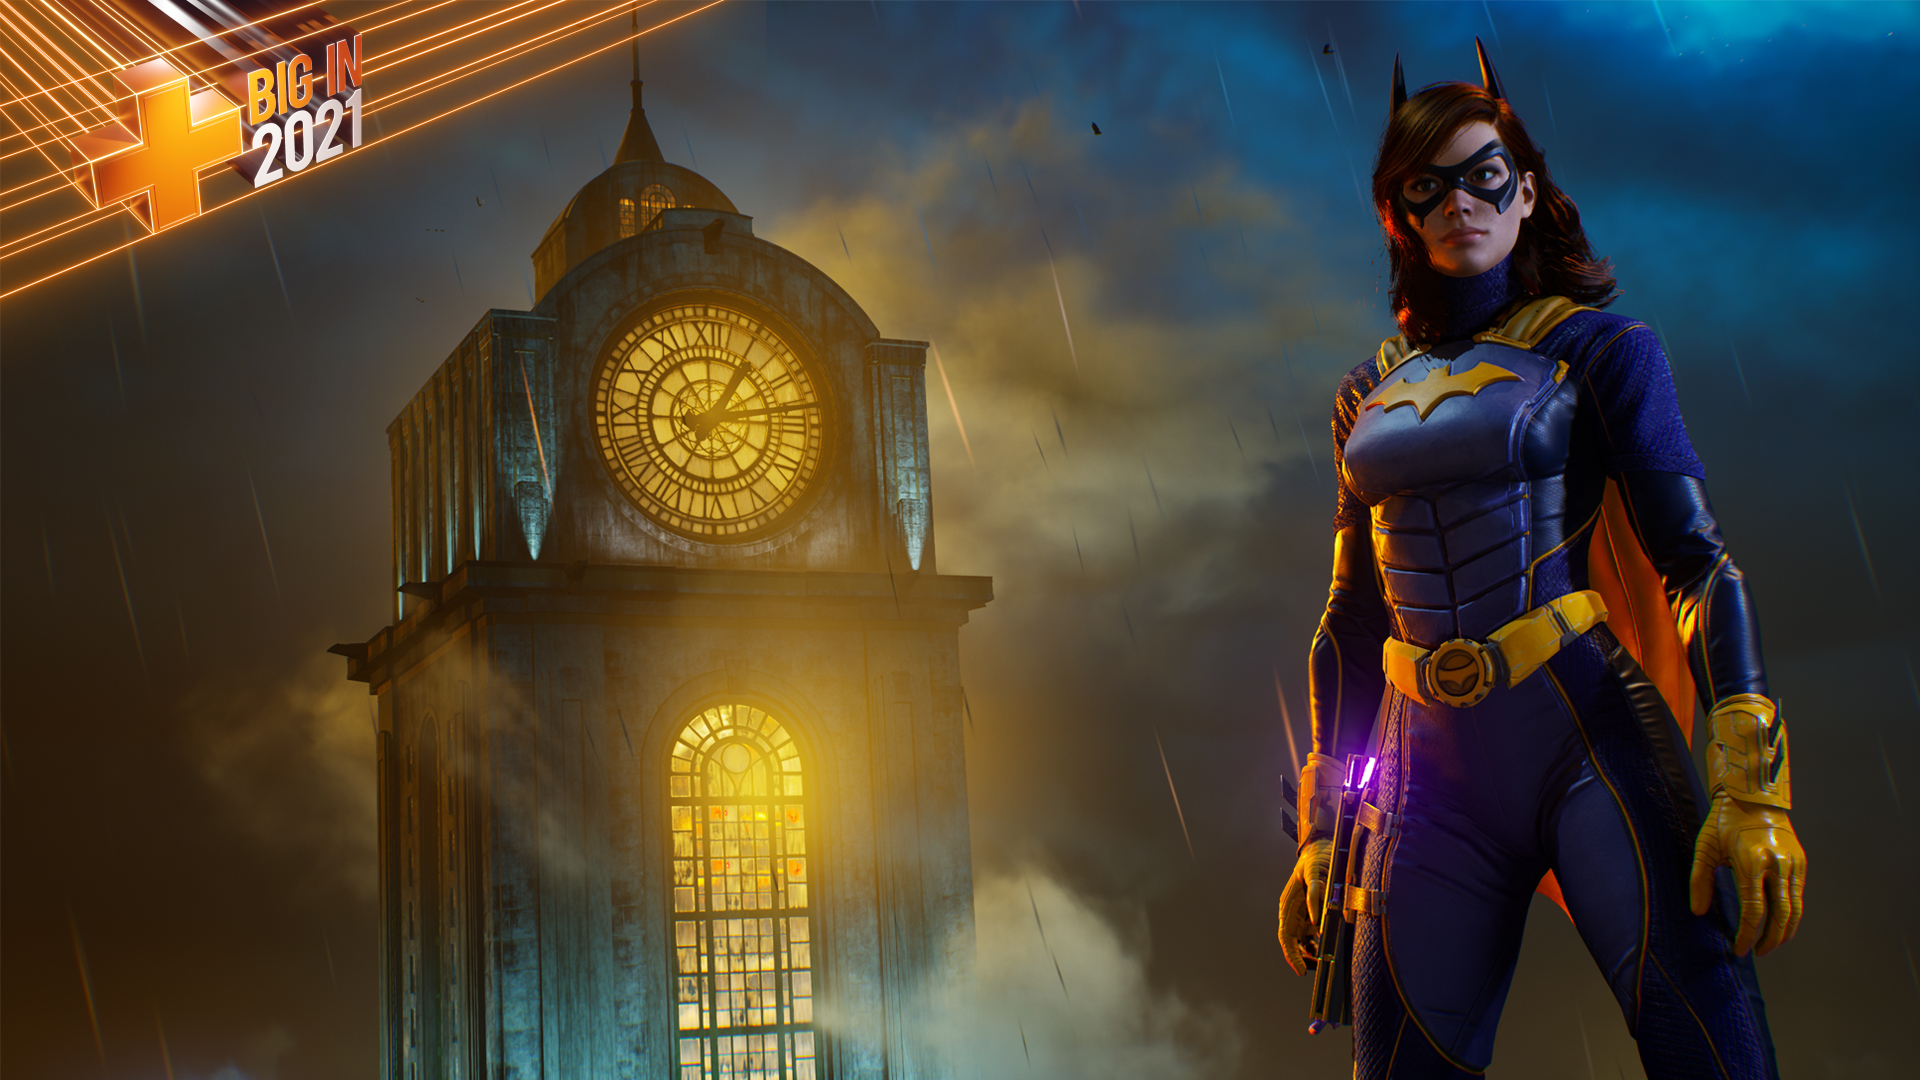 WB Games Montréal, the AAA game studio behind Gotham Knights